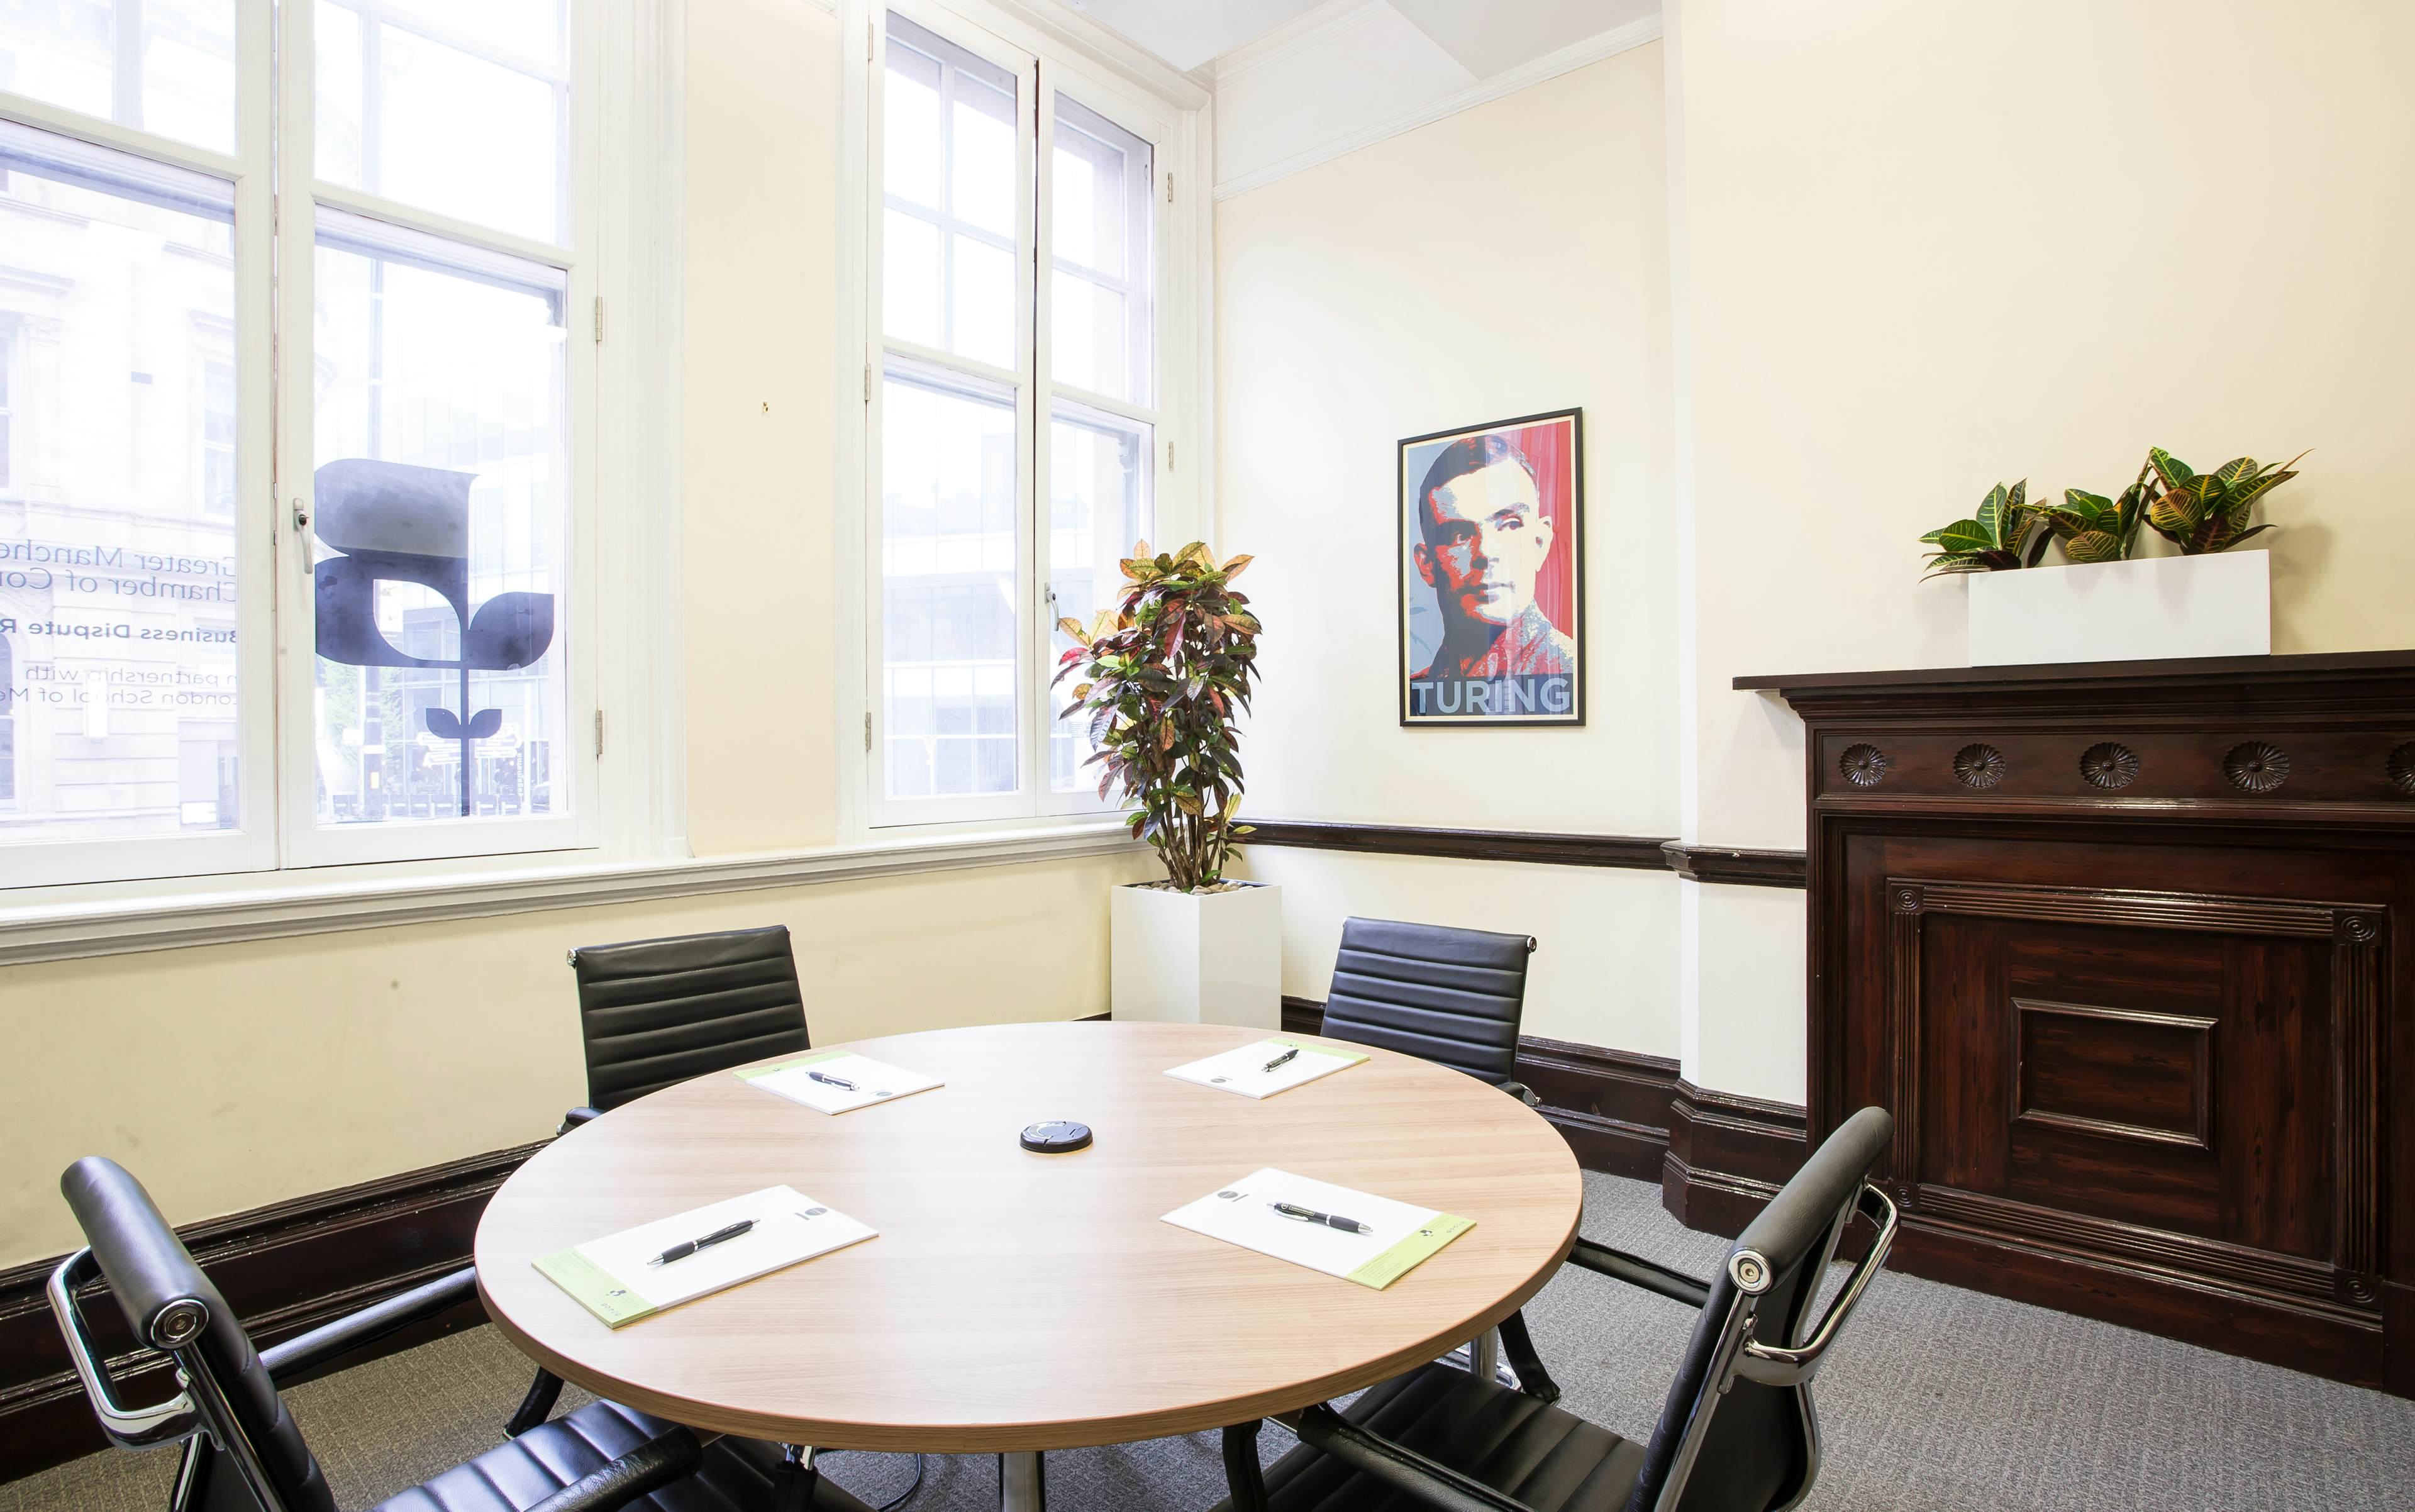 Chamber Space - Alan Turing Room image 1